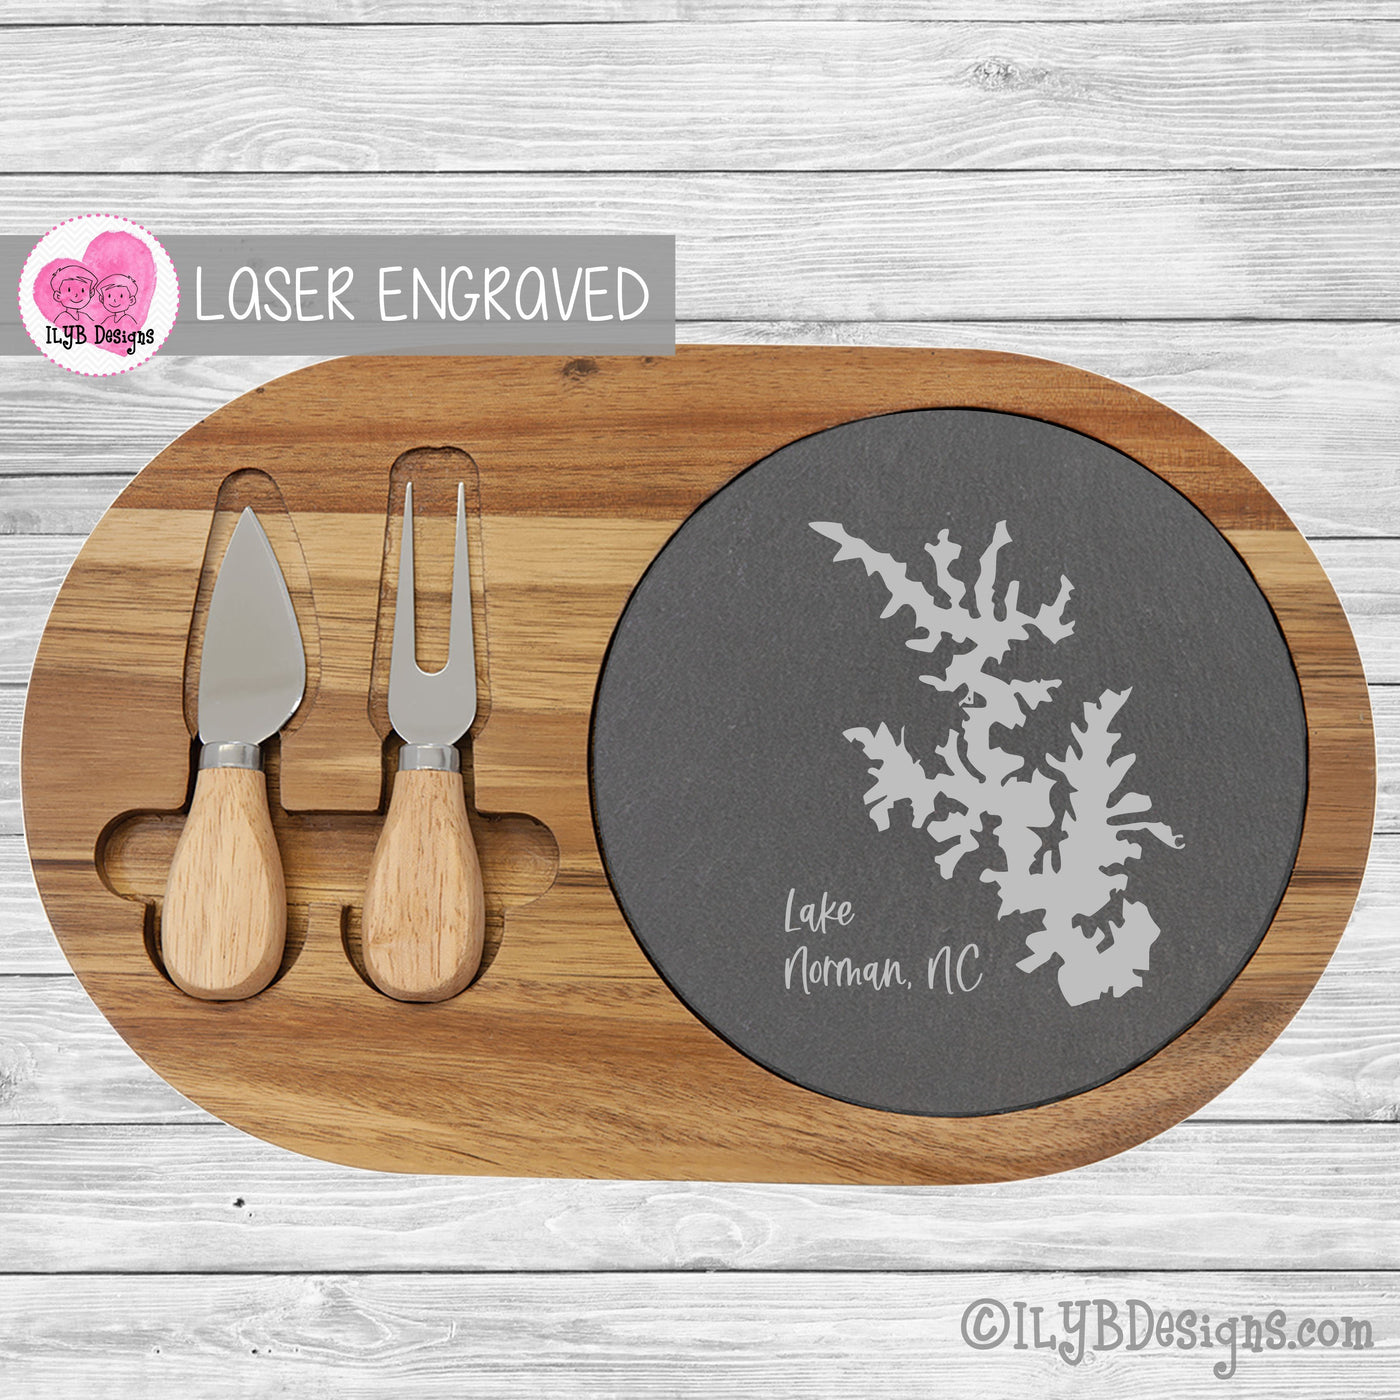 Oval solid acacia wood cheese board with round slate insert and 2 serving tools (a knife and fork). The slate is laser engraved with the silhouette of Lake Norman, NC along with the words in script.